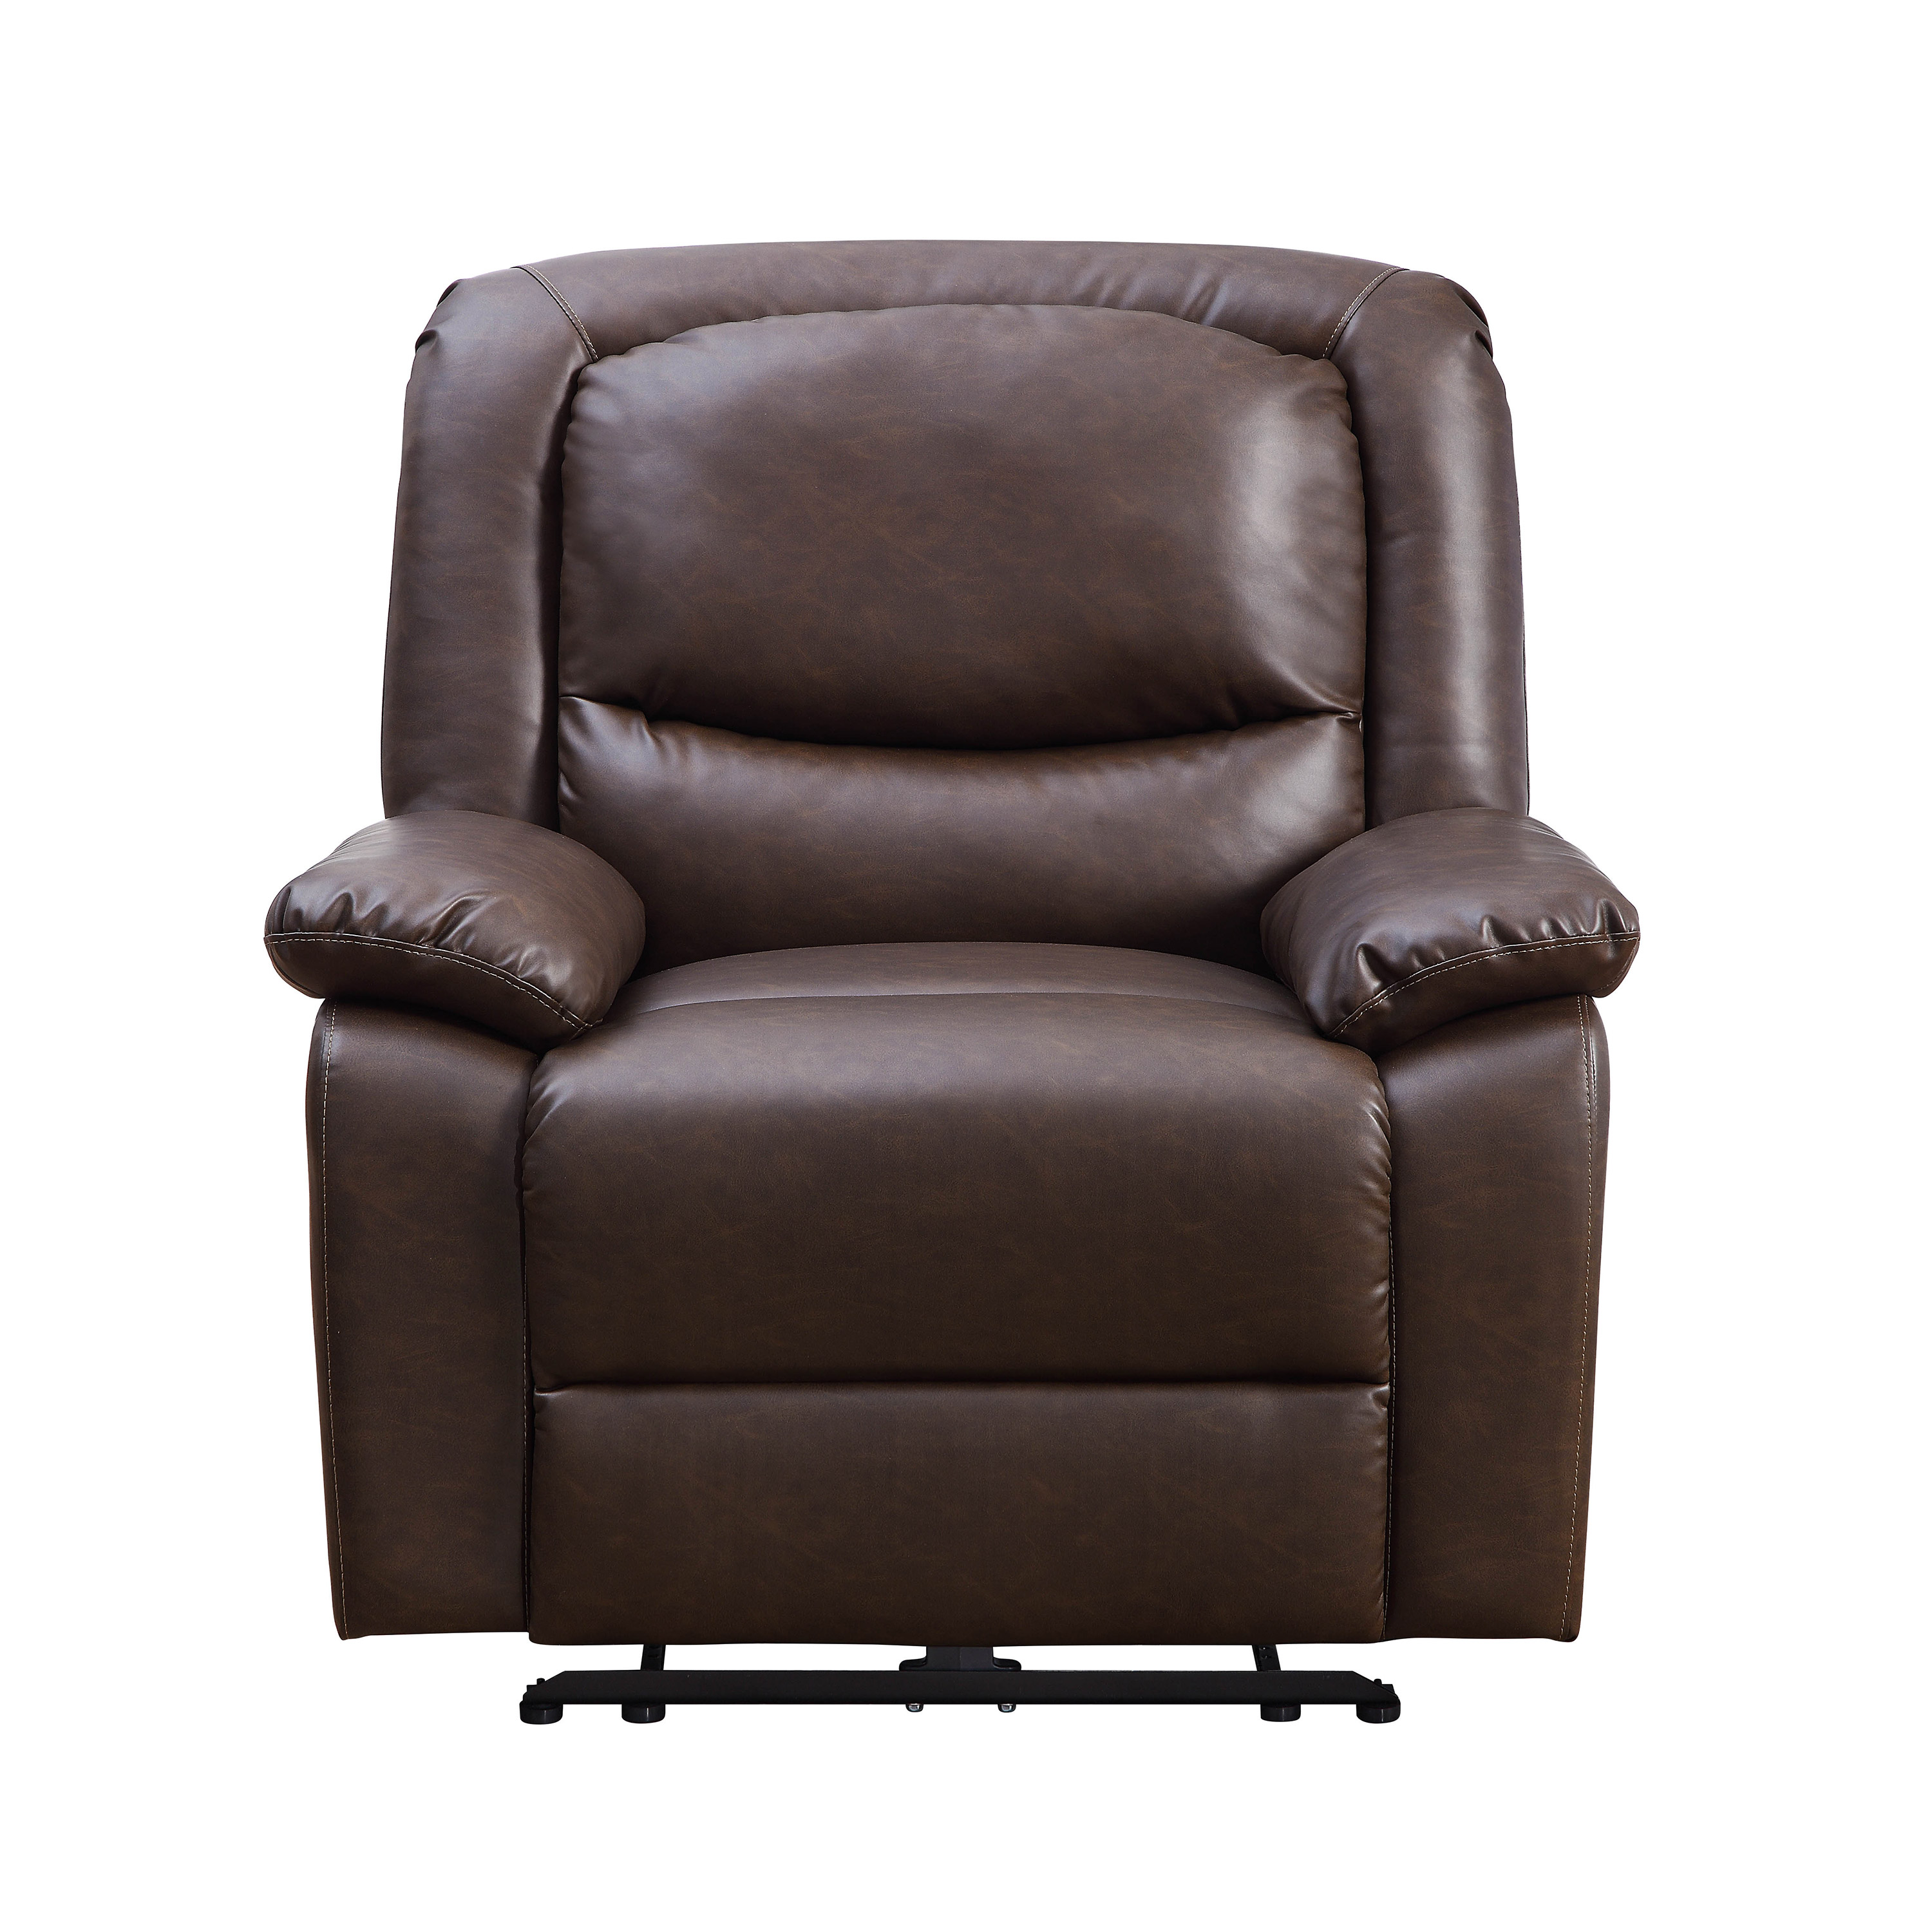 Serta Push-Button Power Recliner with Deep Body Cushions, Brown Faux Leather Upholstery - image 7 of 9